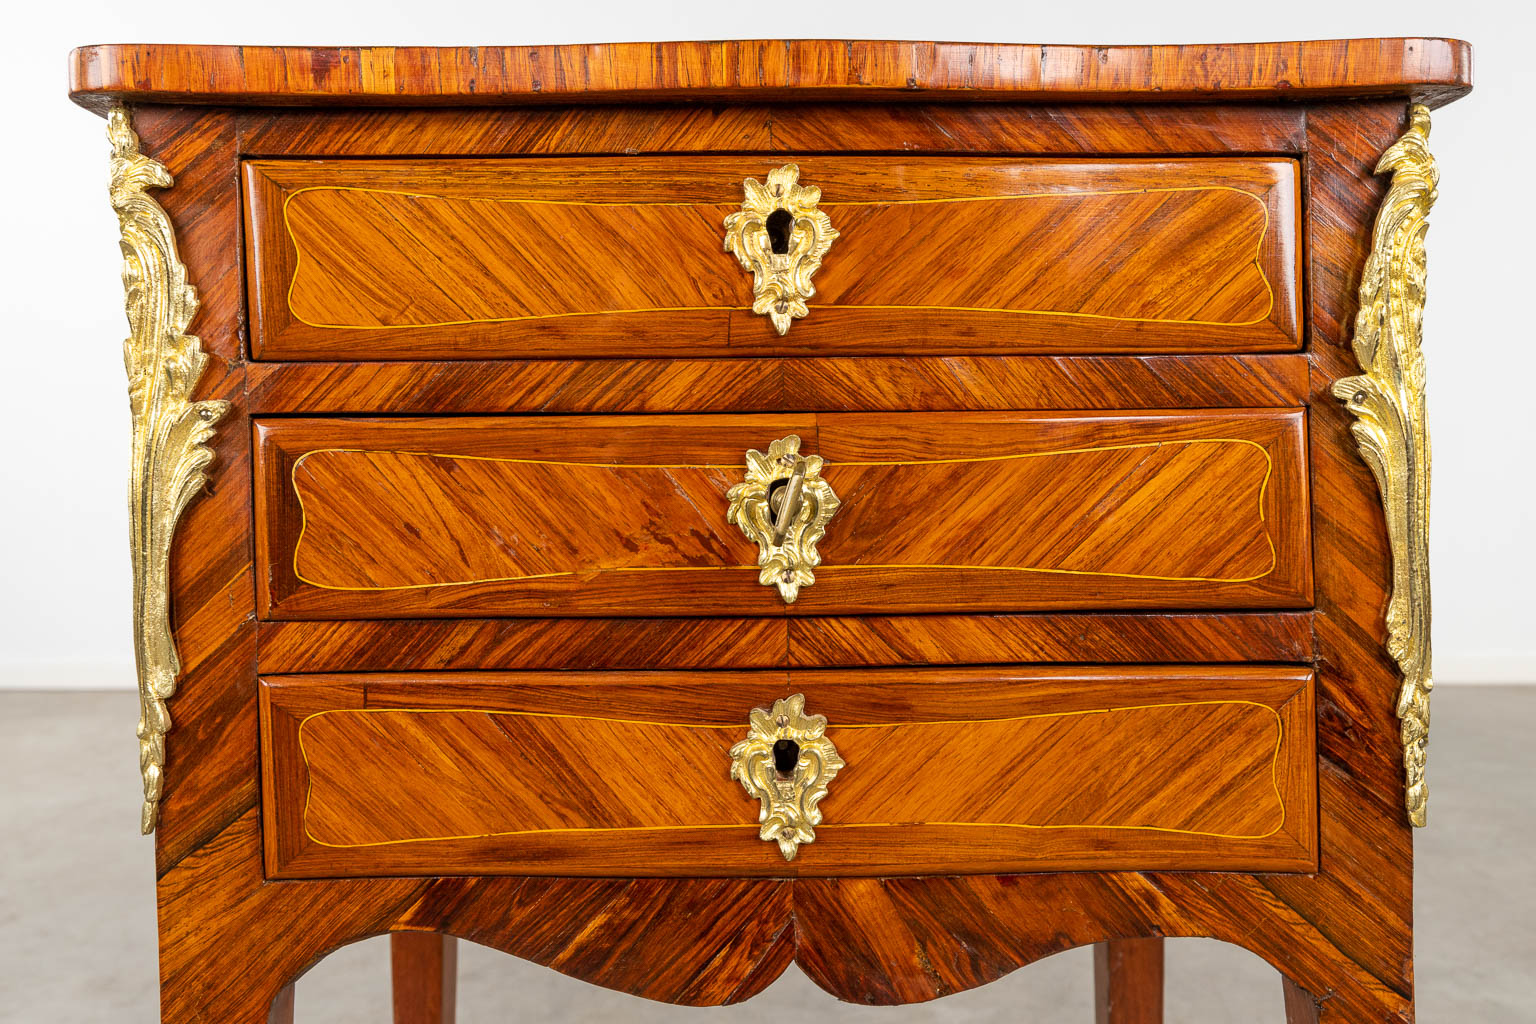 A small three-drawer cabinet, Louis XV, marquetry inlay mounted with bronze. 18th C. (D:32 x W:44 x H:70 cm)